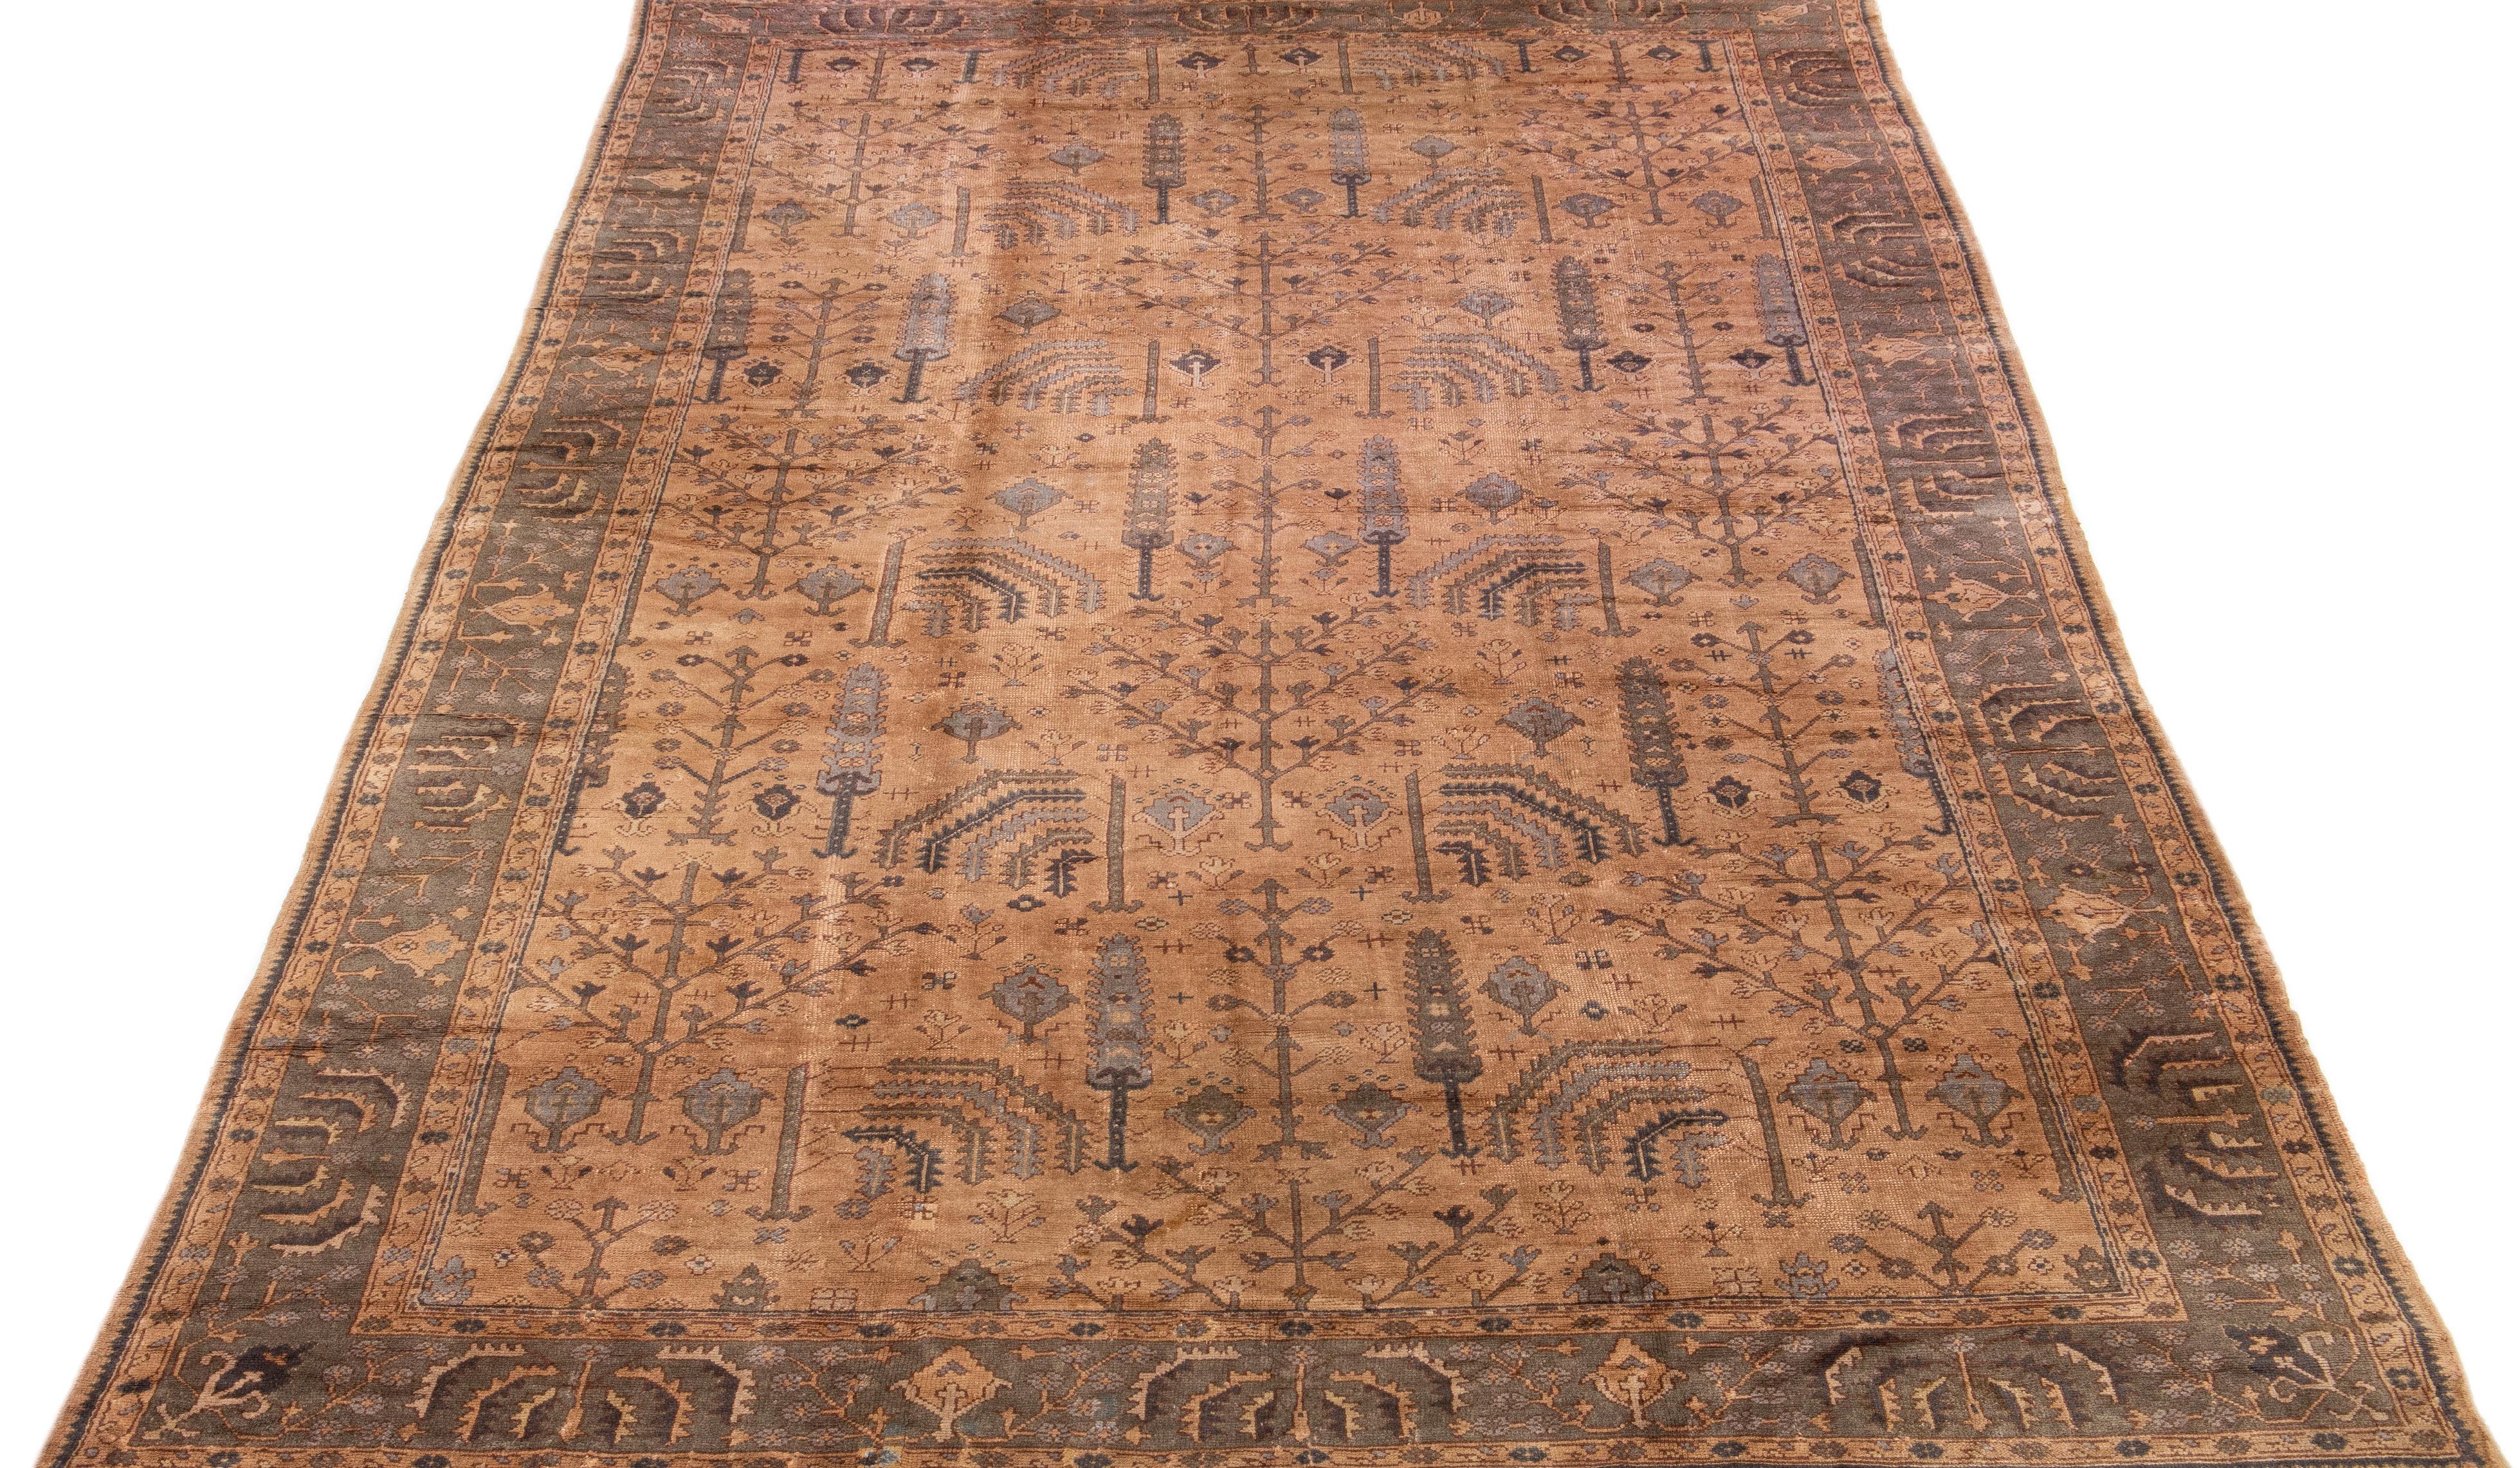 Beautiful Antique Oushak hand-knotted wool rug with a tan field. This Turkish rug has a gray-designed frame with blue and beige accents in a gorgeous all-over floral pattern design.

This rug measures: 10'8